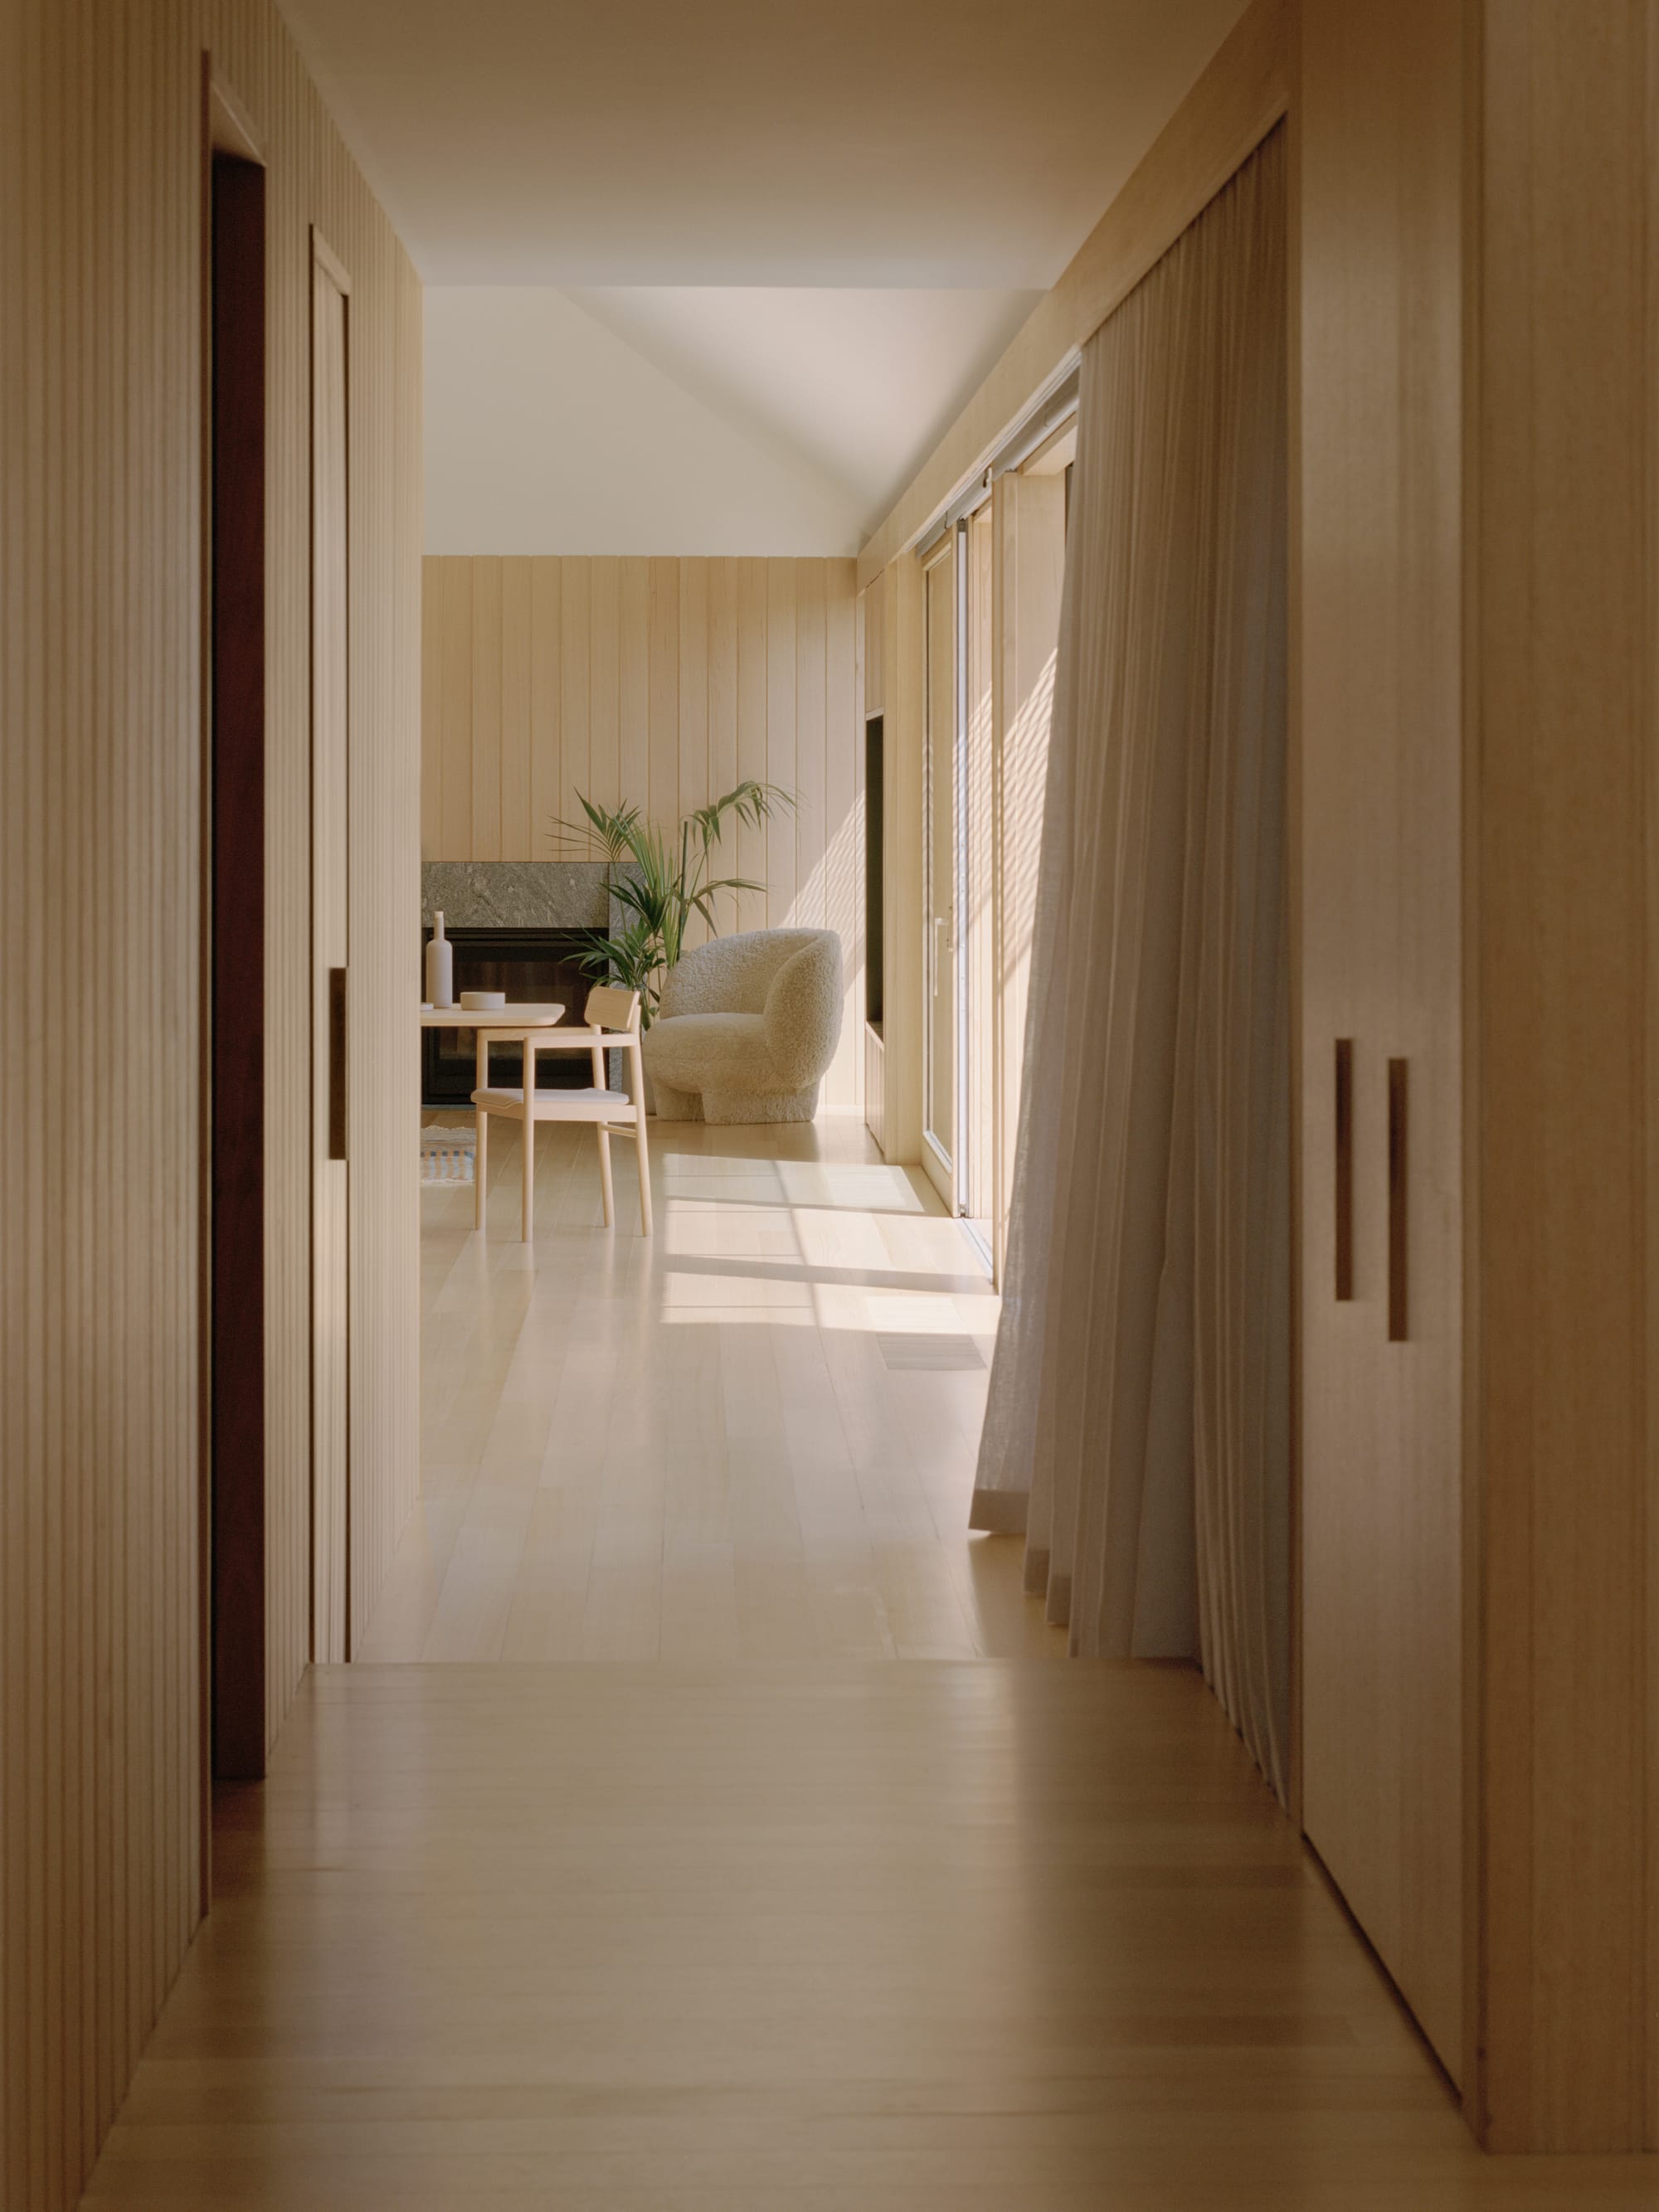 Gable Park by Weaver+Co Architects. Photography by Tasha Tylee. Hallway with timber walls and floors opens onto open plan dining and living room. High white cathedral ceilings and sliding doors let in light. 